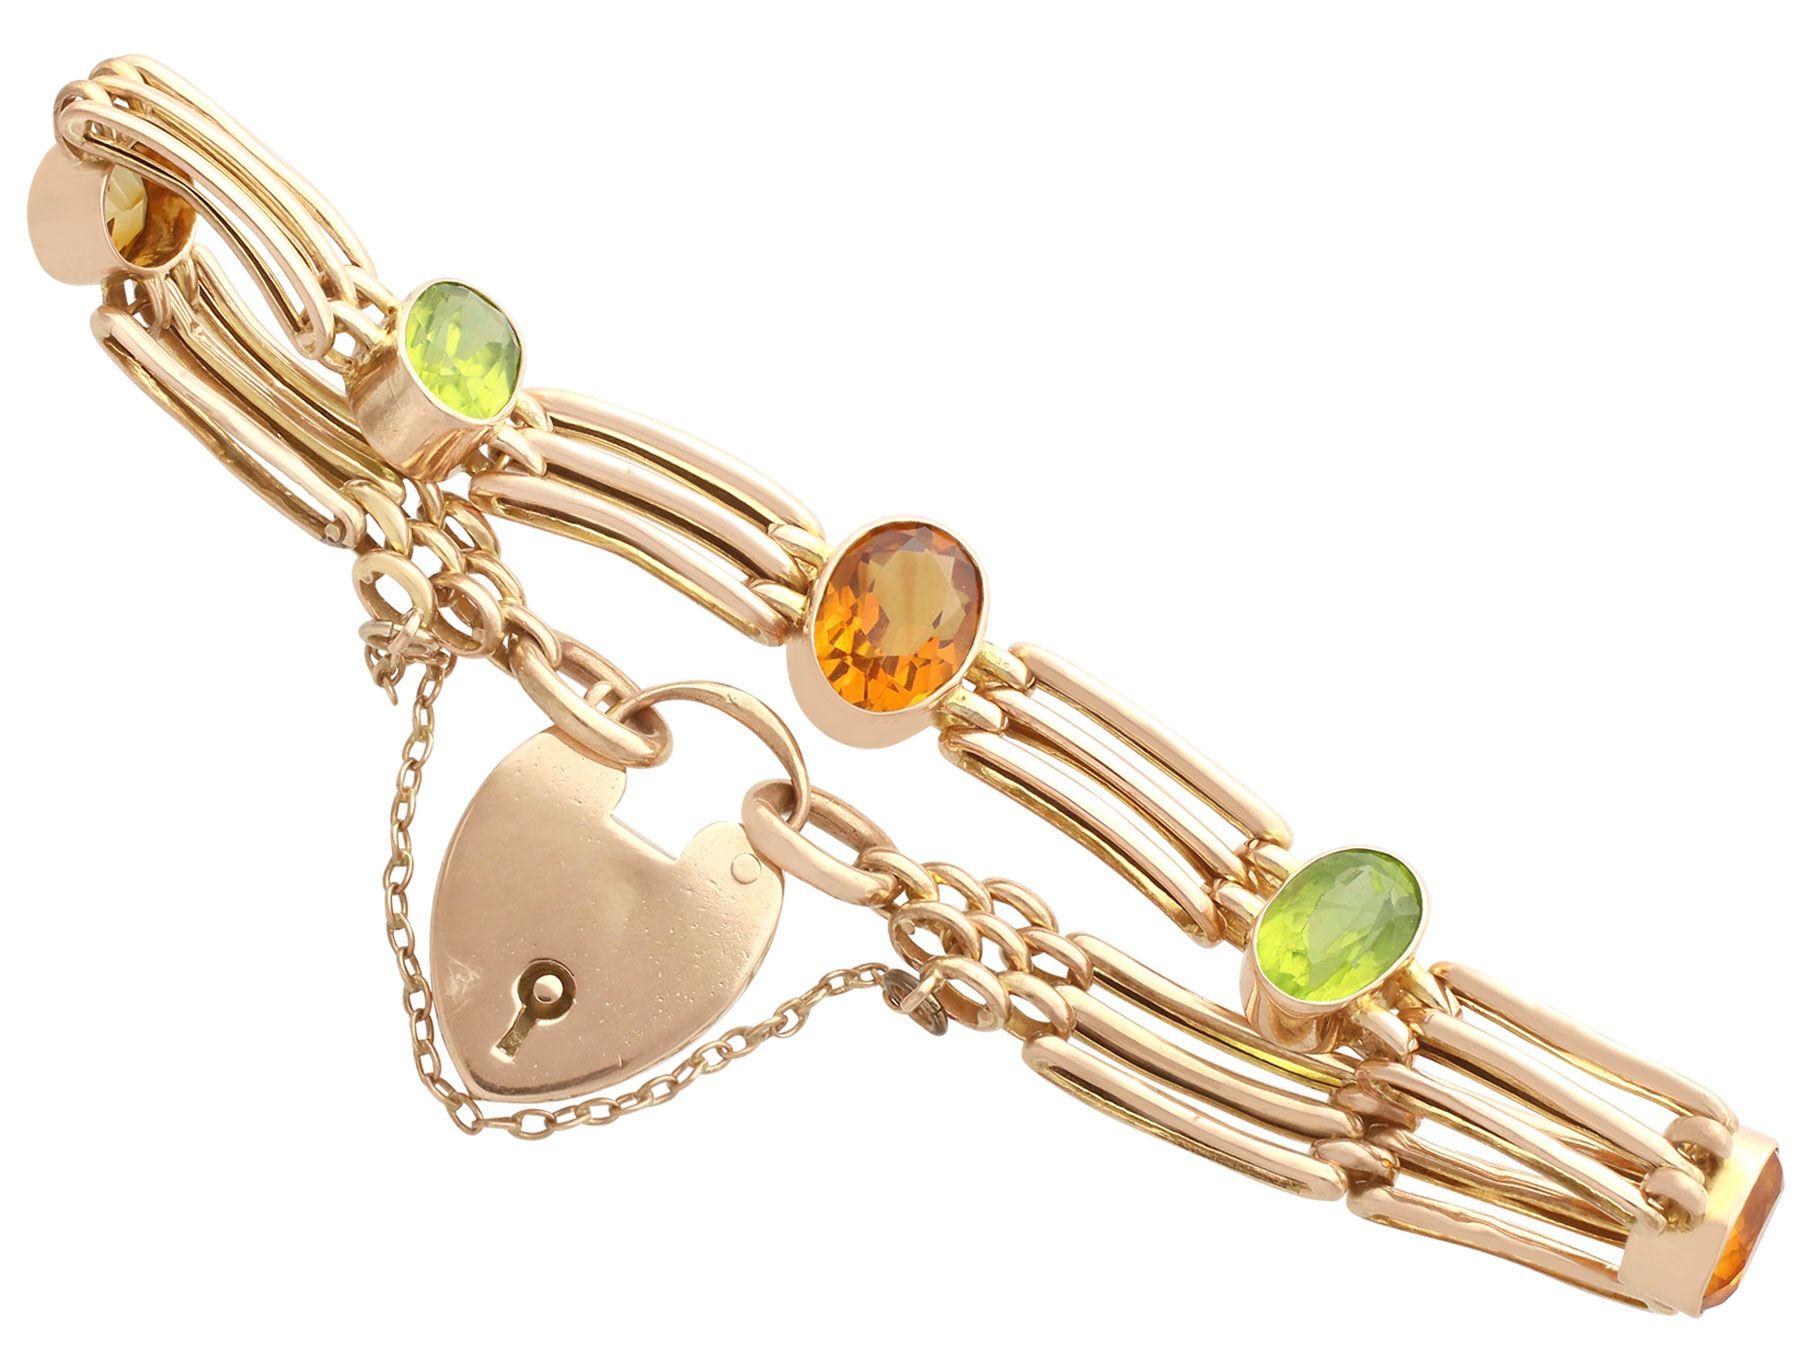 A fine and impressive 5.19 carat cognac citrine and 3.72 carat peridot, 9 karat yellow gold 3 bar gate style bracelet; part of our diverse antique jewellery and estate jewelry collections.

This fine and impressive gemstone gate bracelet has been